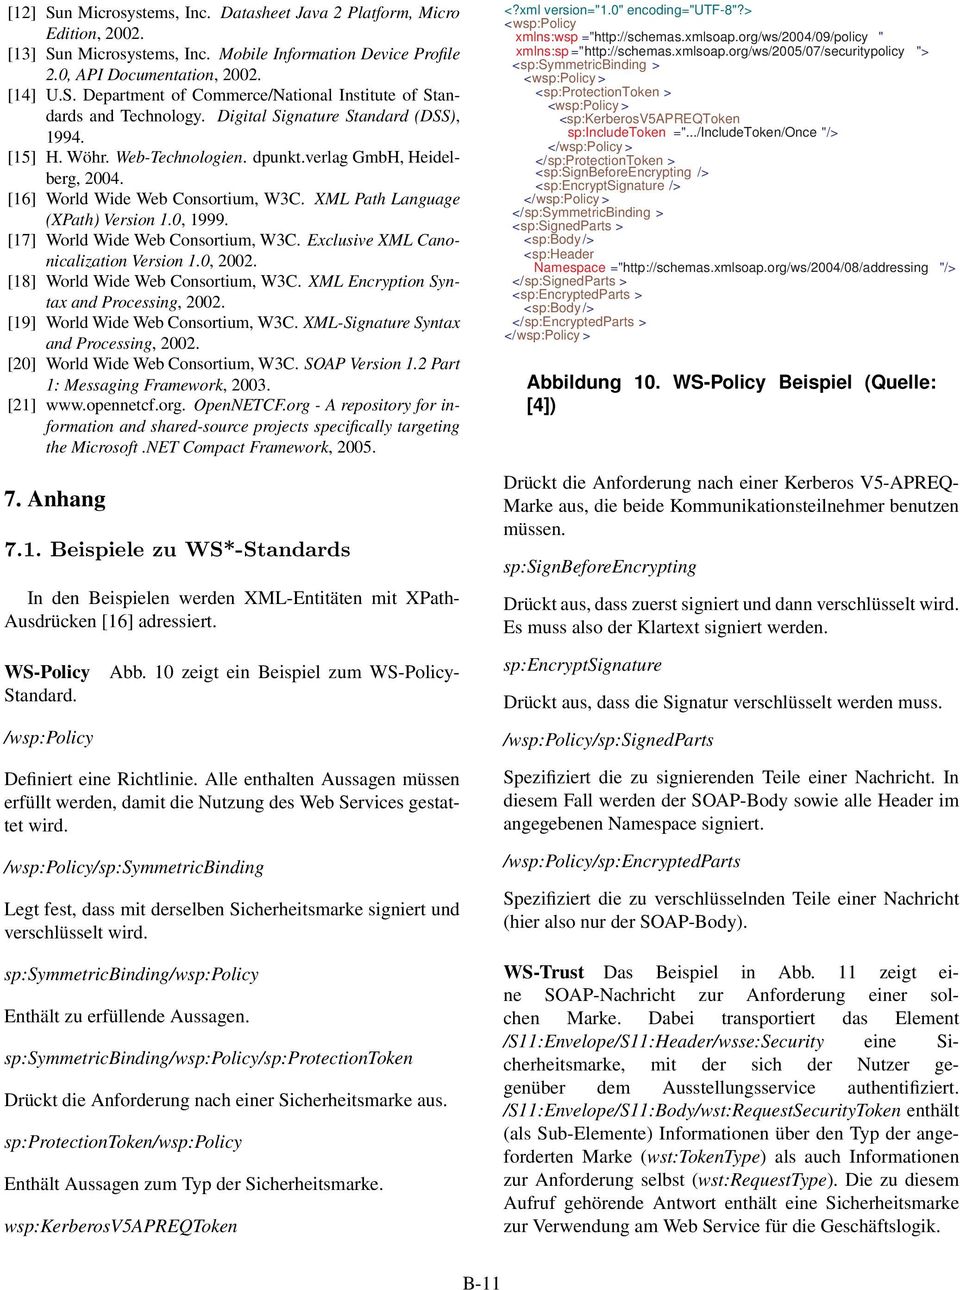 [17] World Wide Web Consortium, W3C. Exclusive XML Canonicalization Version 1.0, 2002. [18] World Wide Web Consortium, W3C. XML Encryption Syntax and Processing, 2002.